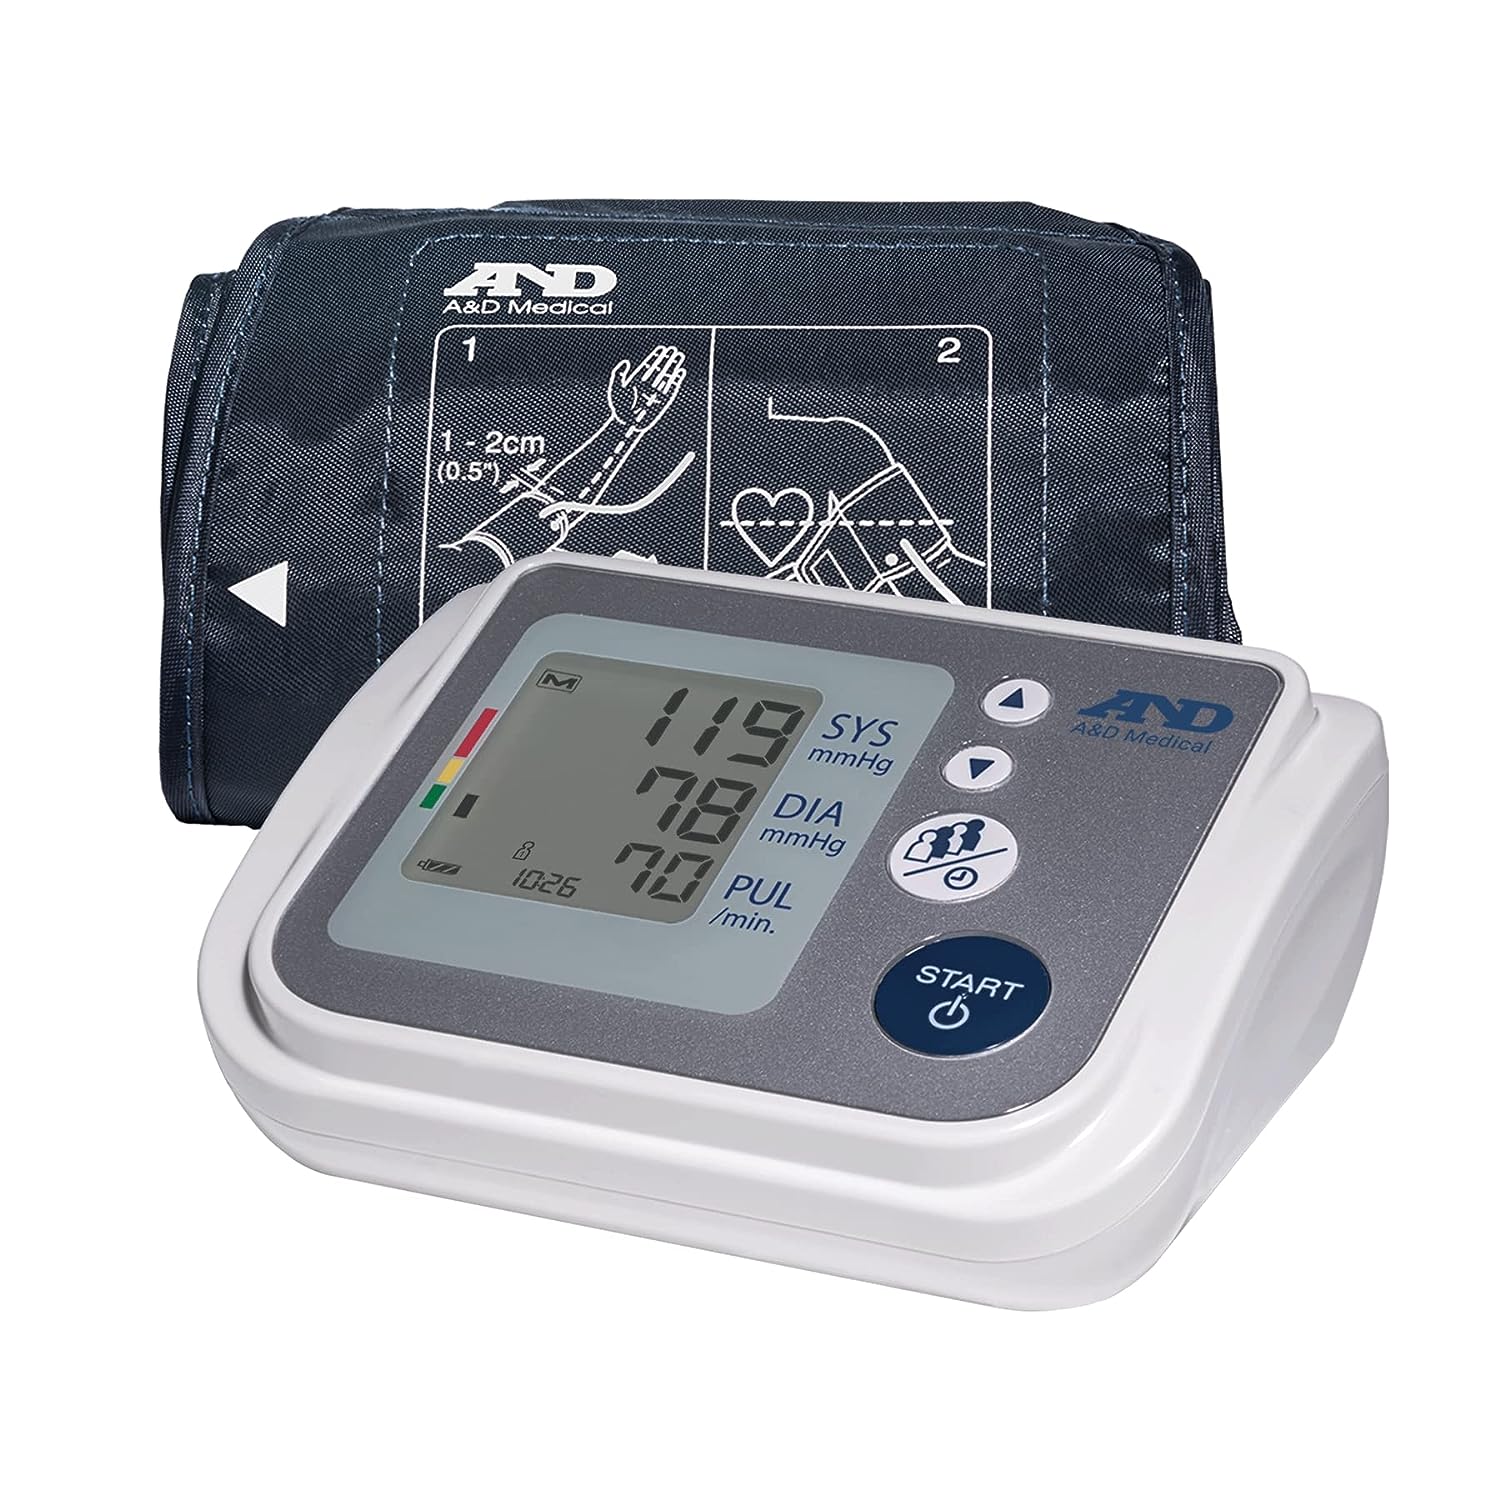 A&D Medical Premium Multi-User Upper Arm Cuff BP Machine (8.6-16.5"/22-42 cm) - Home BP Monitor, One-Click Operation, Digital LCD Screen - Up to 4 Users" - Midwest DME Supply